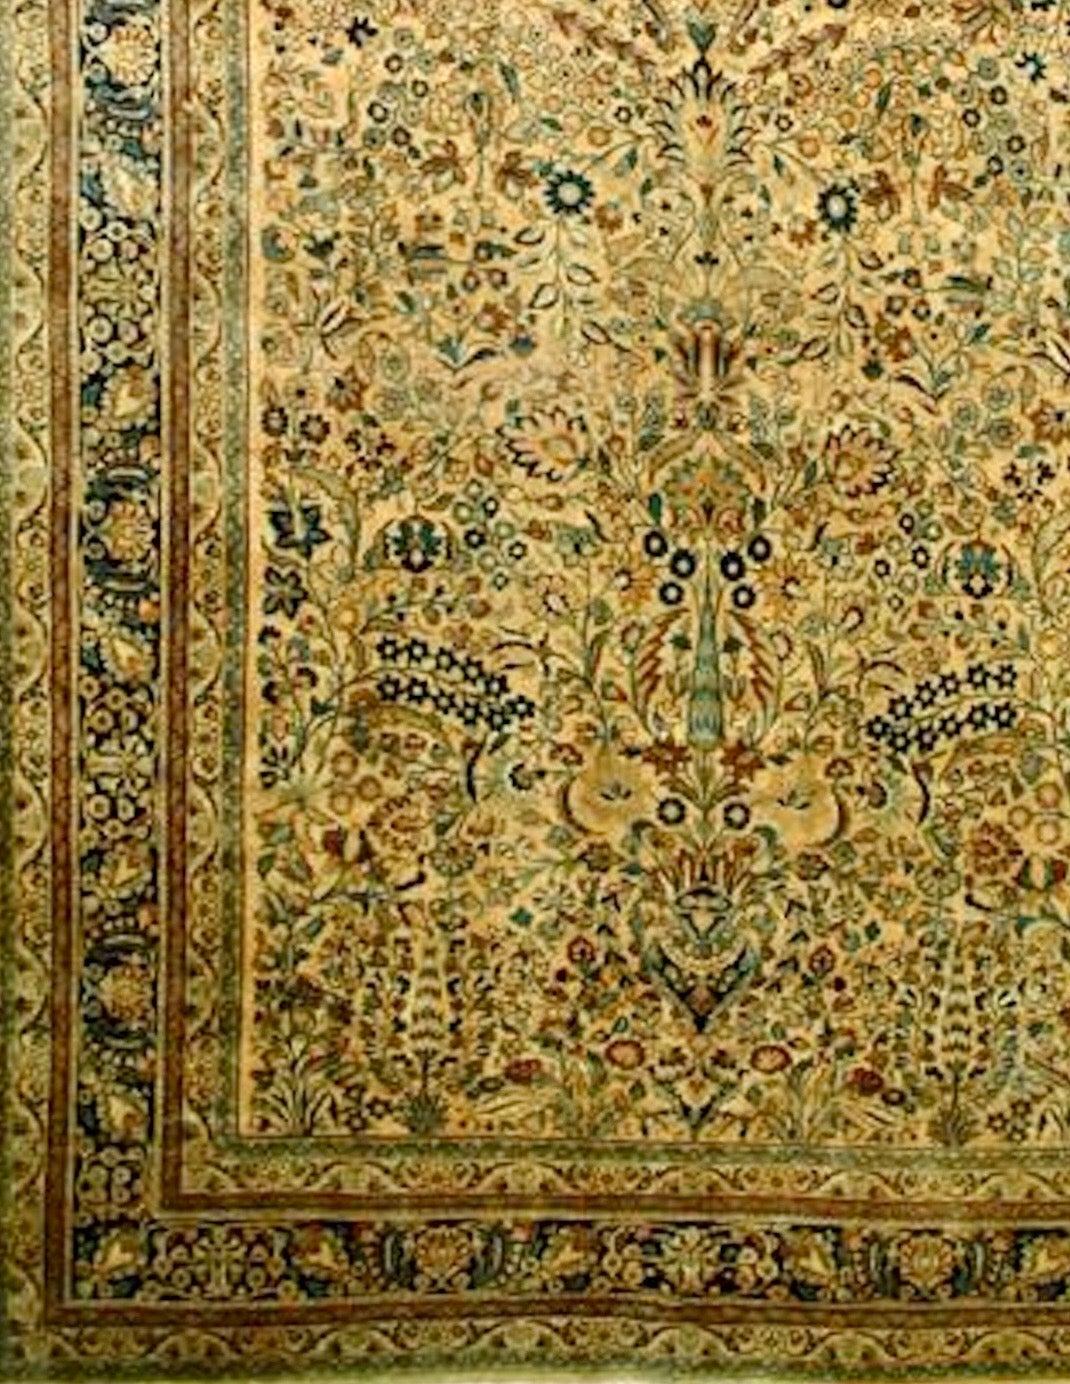 Hand-Knotted Rare Oversize Antique Persian Mashad Rug, c. 1920s For Sale